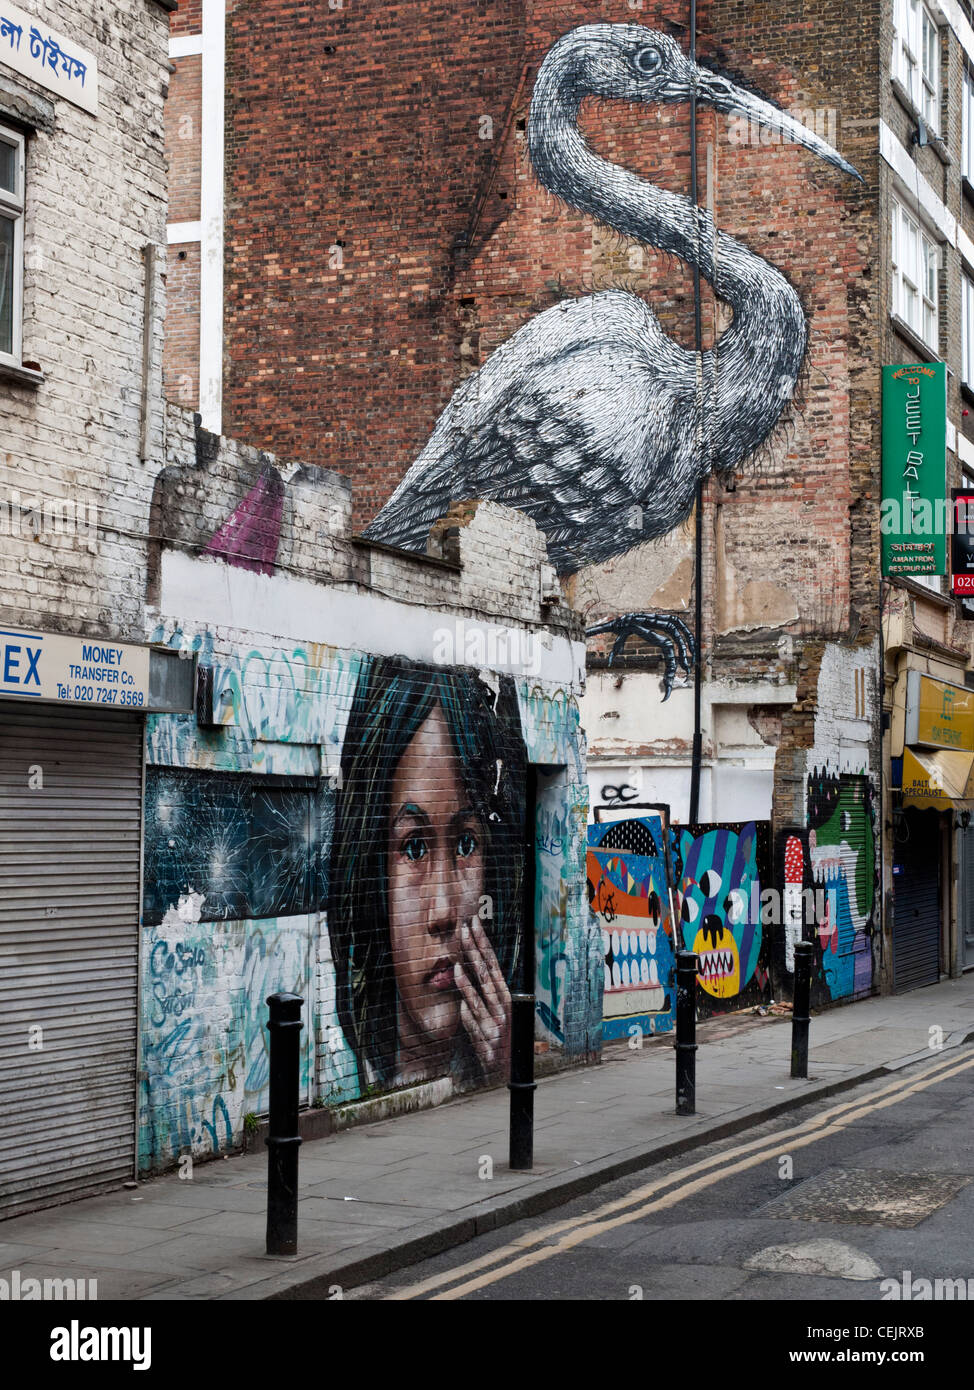 Street art of a bird by the artist Roa in Hanbury Street , East London. The artwork in the foreground is by artist Cosmo Sarson. Stock Photo